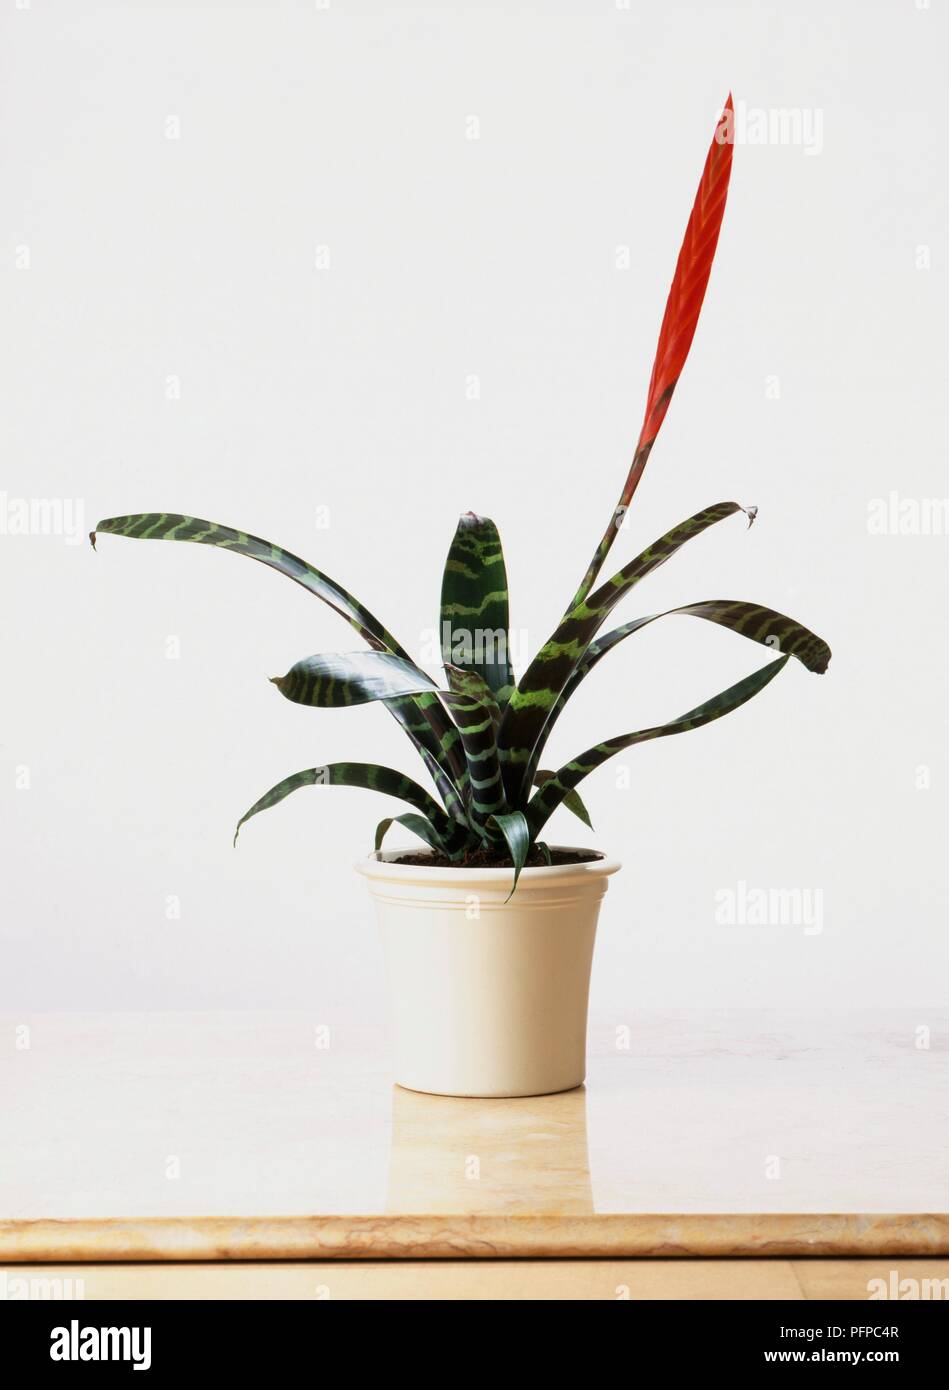 Vriesea splendens (Flaming sword) showing red inflorescence and variegated leaves, in ceramic pot Stock Photo